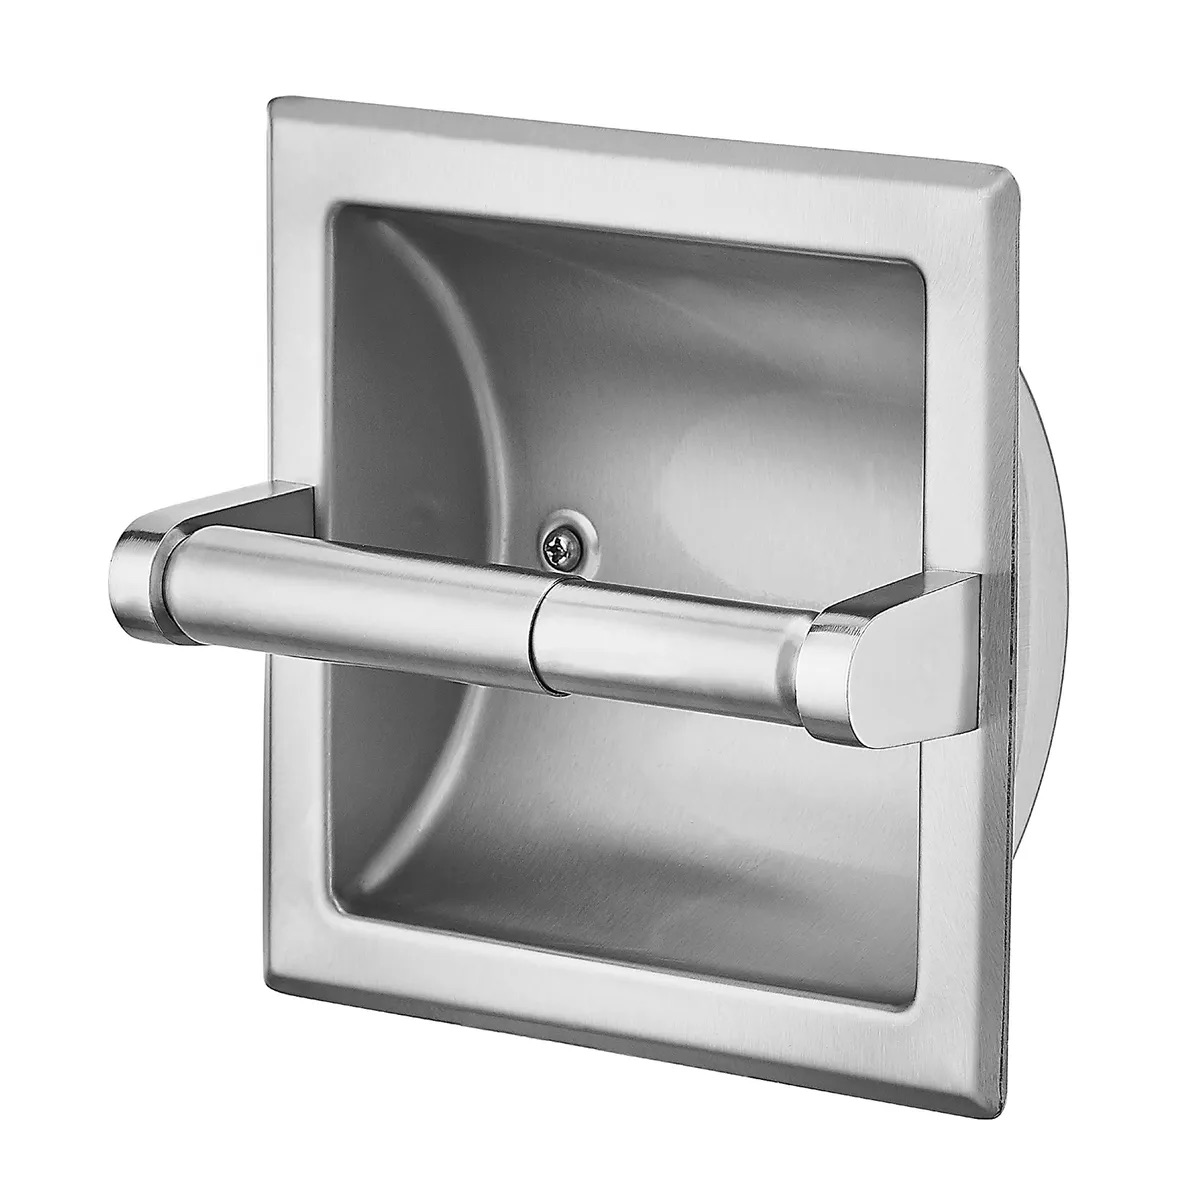 ATAYAL Recessed Toilet Paper Holder, Metal, Easy Installation